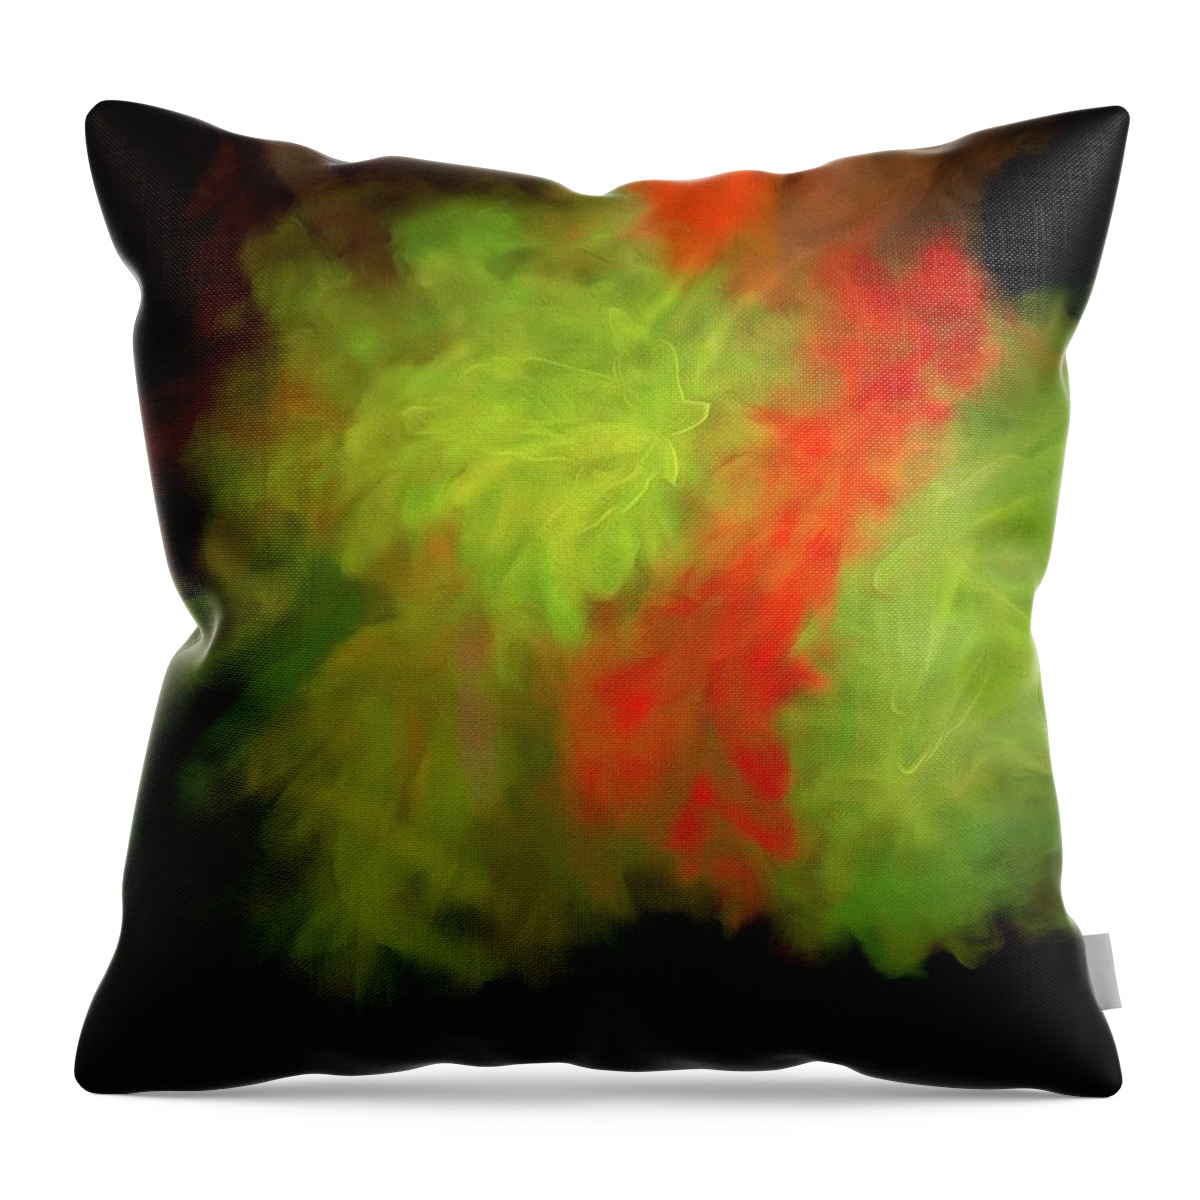 Background Throw Pillow featuring the digital art Abstract No. 60 by Steve DaPonte